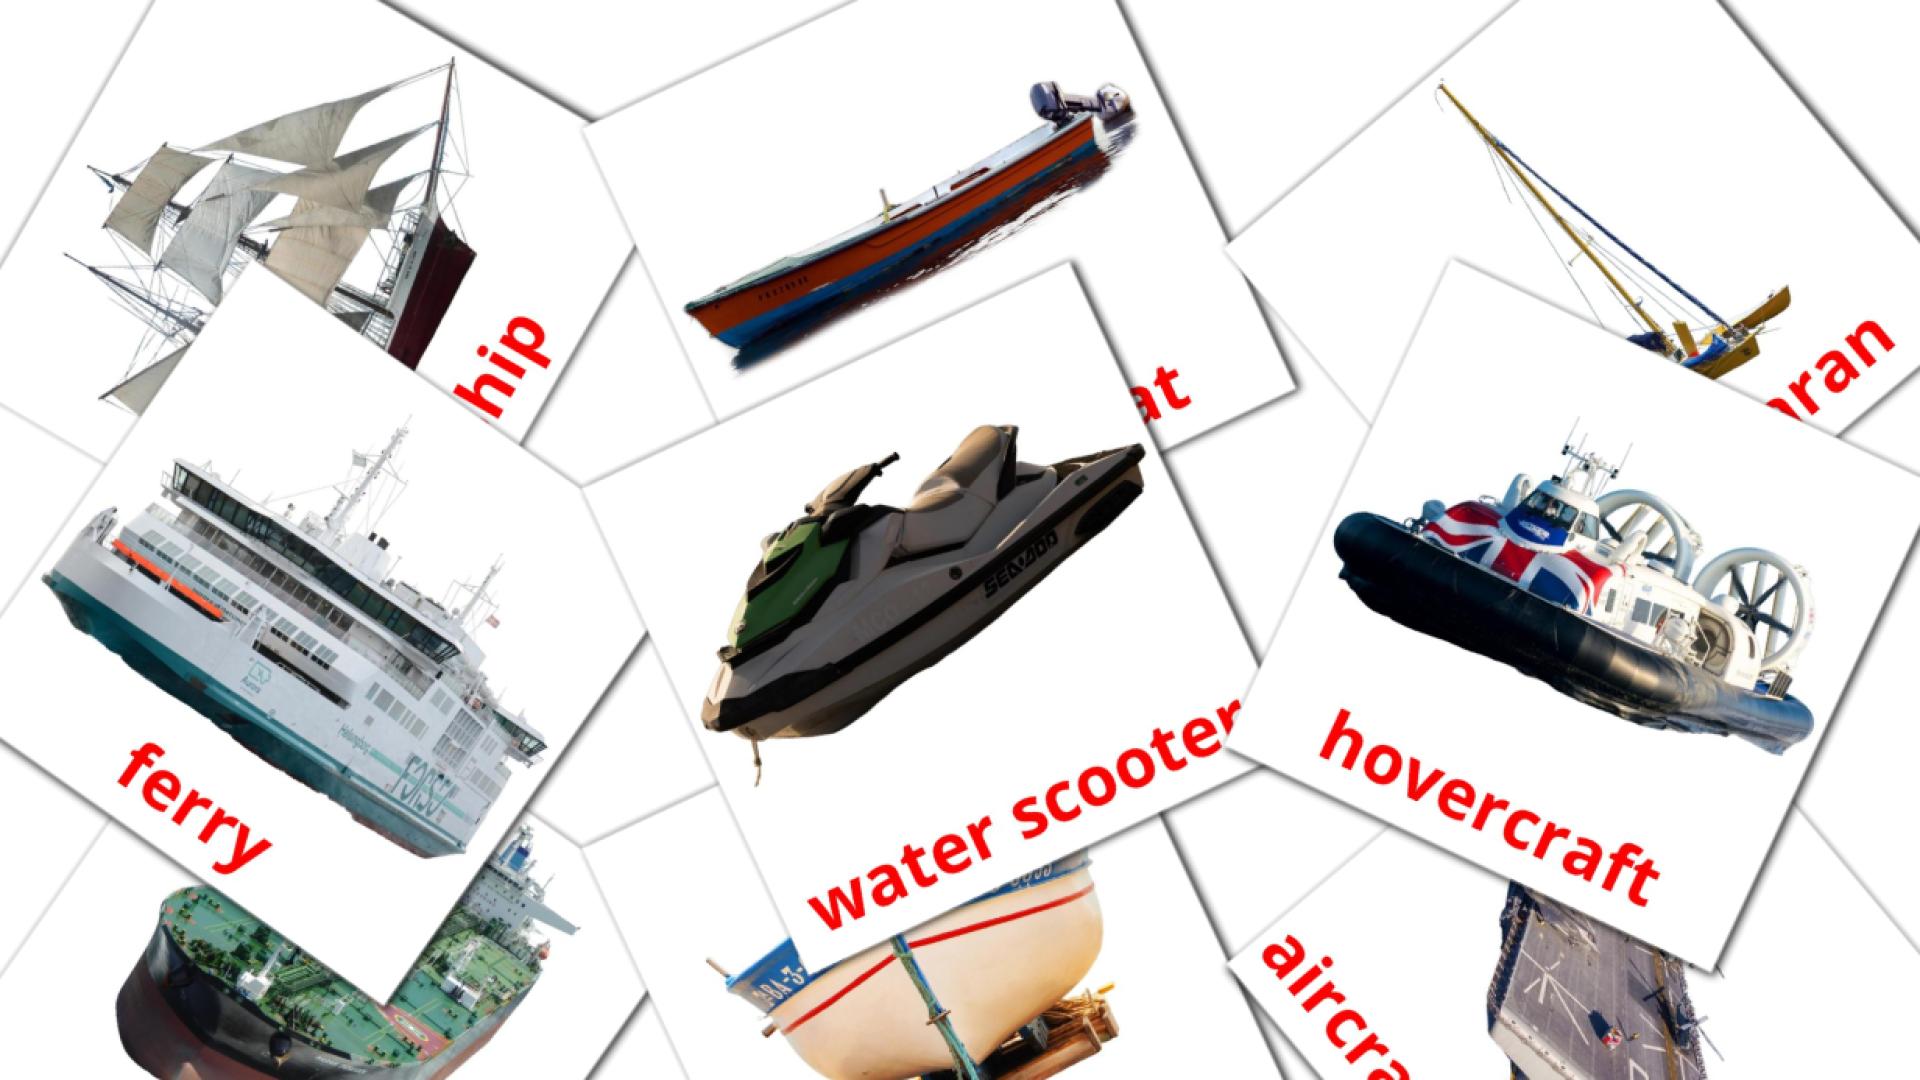 18 Water transport flashcards